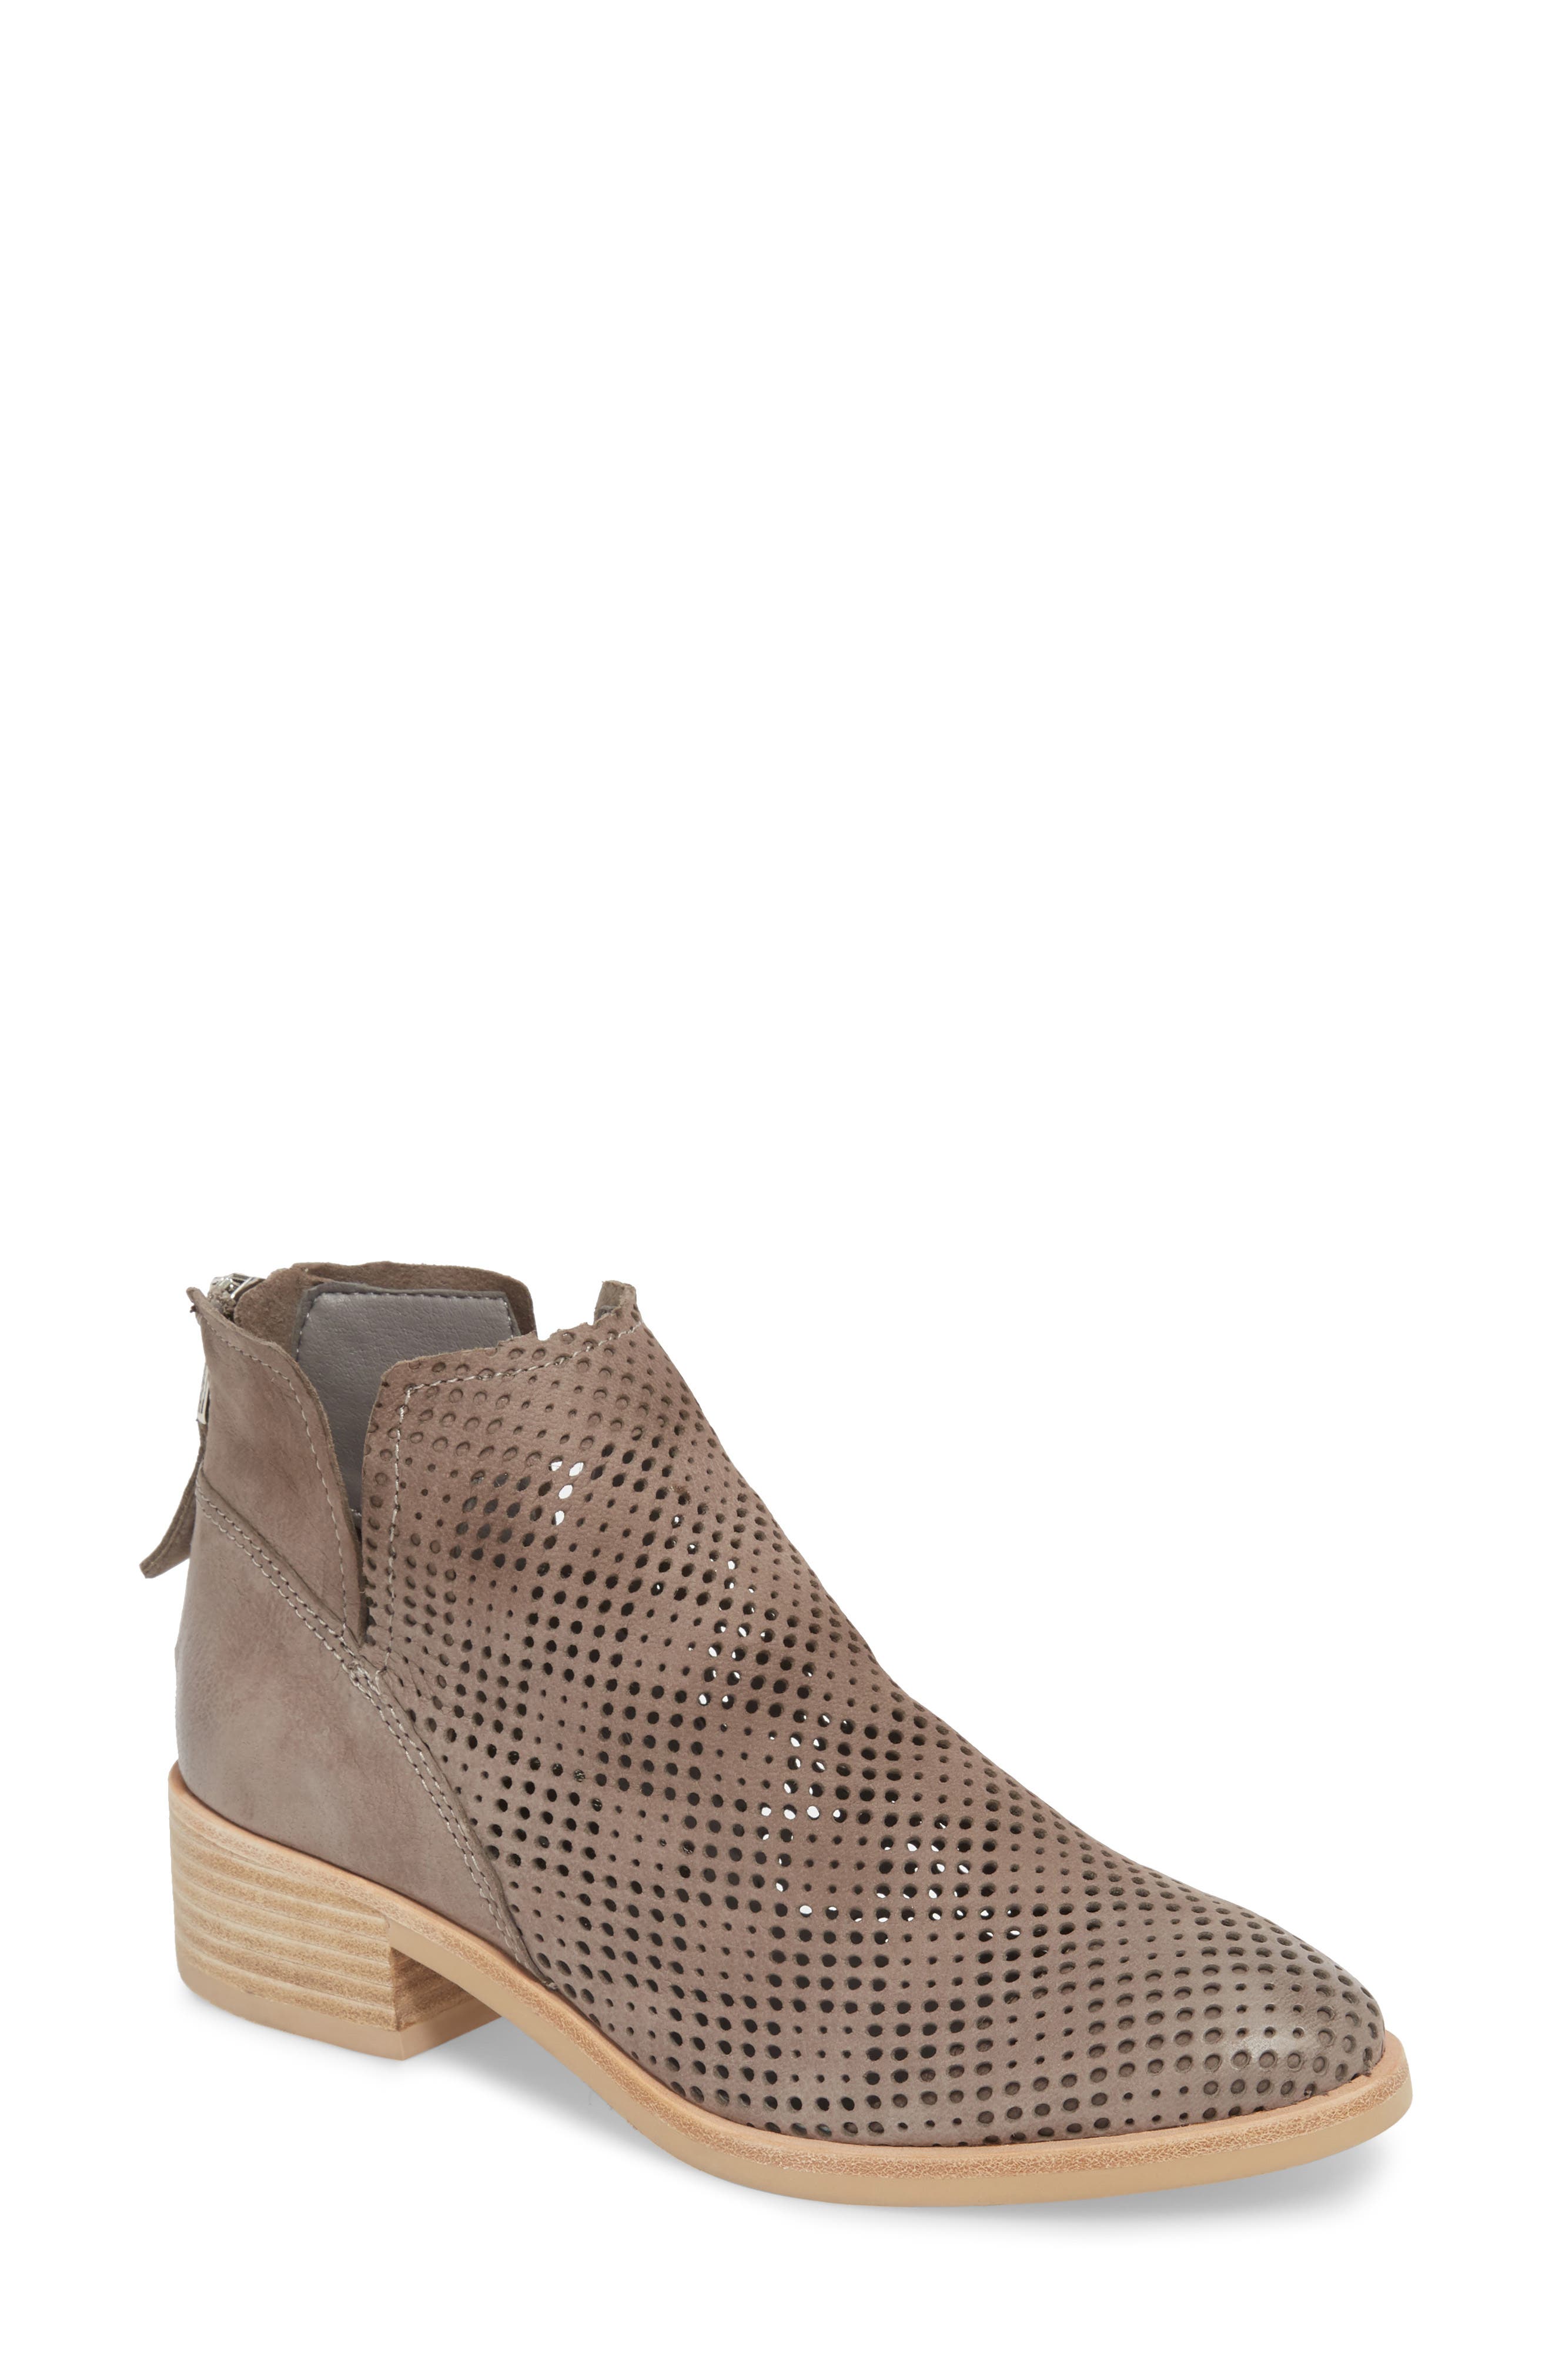 Dolce Vita Tommi Perforated Bootie 